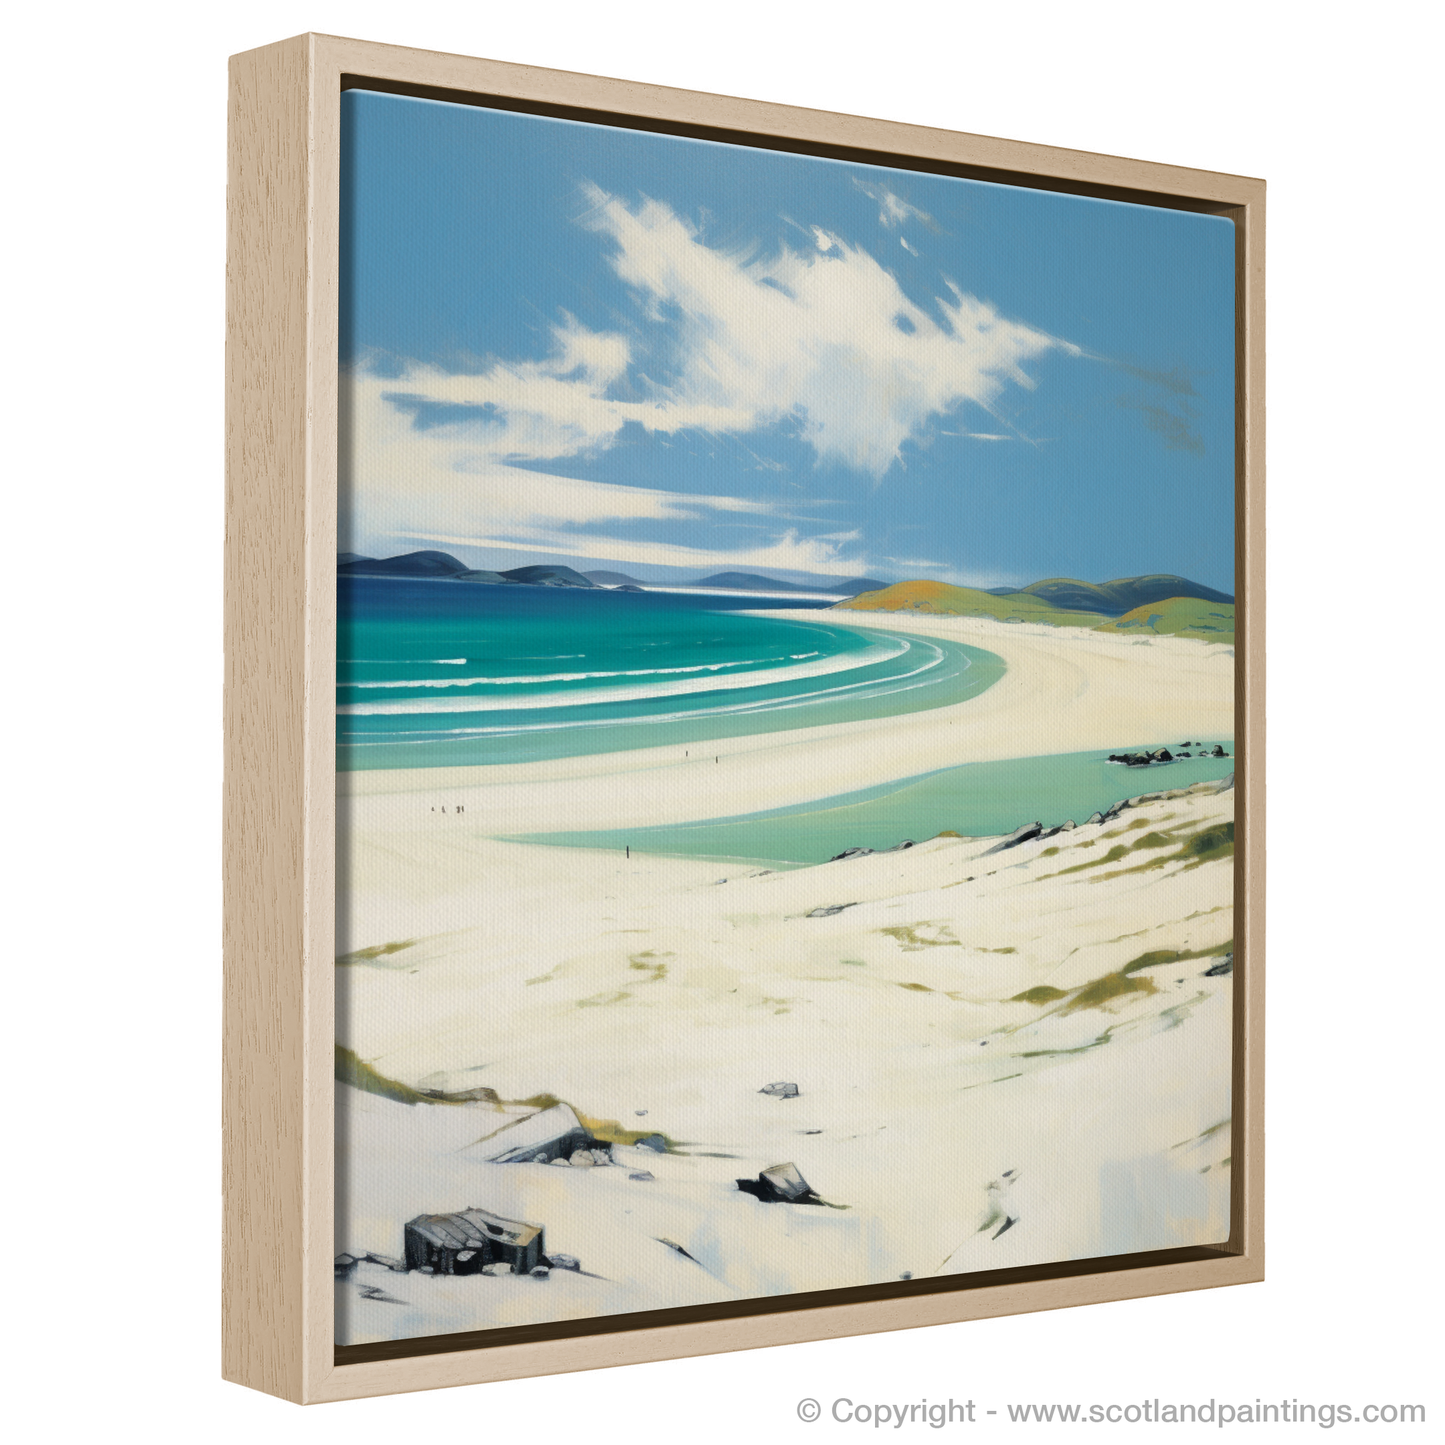 Painting and Art Print of Luskentyre Beach, Isle of Harris entitled "Sweeping Sands and Turquoise Waters: Luskentyre Beach Unveiled".